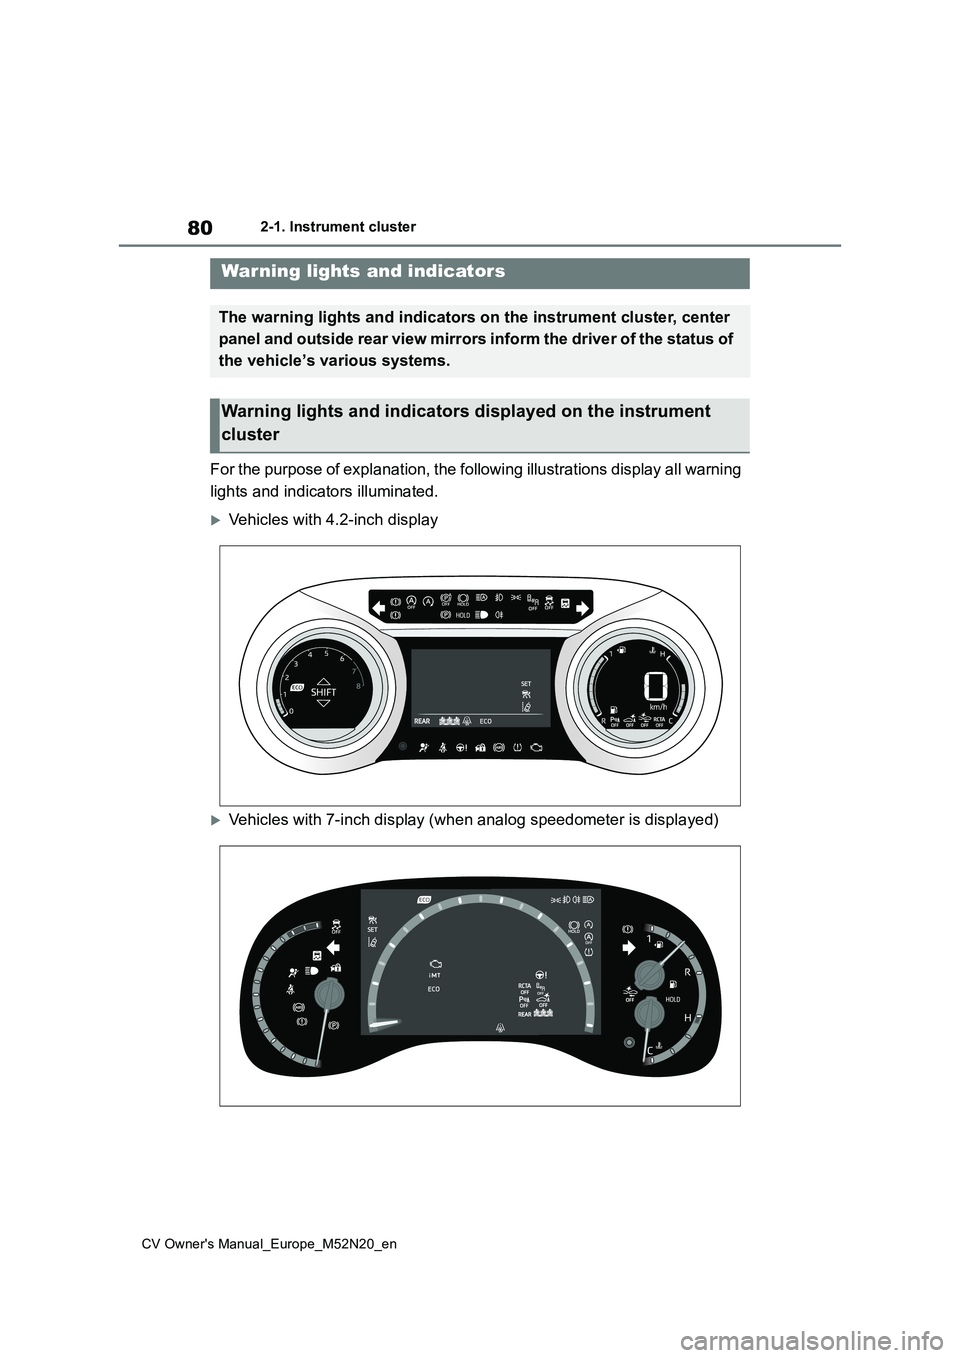 TOYOTA YARIS CROSS 2022  Owners Manual 80
CV Owner's Manual_Europe_M52N20_en
2-1. Instrument cluster
2-1.In strument clu ste r
For the purpose of explanation, the following illustrations display all warning  
lights and indicators illu